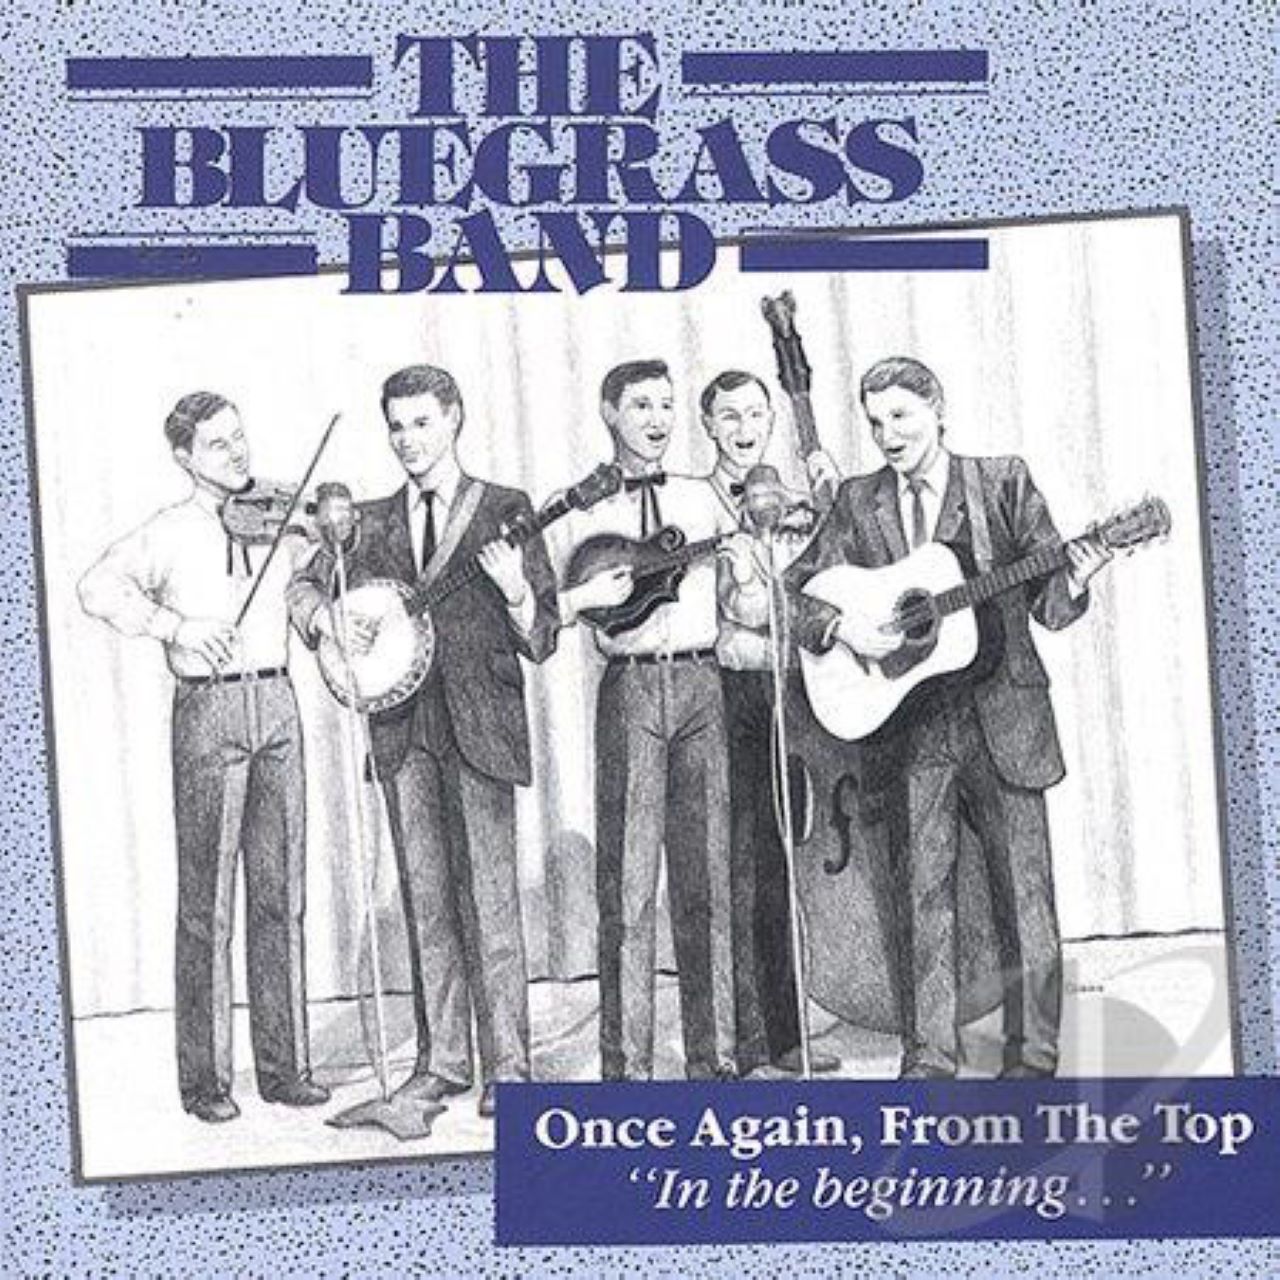 Bluegrass Band - In The Beginning, Vol.1 – Vol.2 cover album